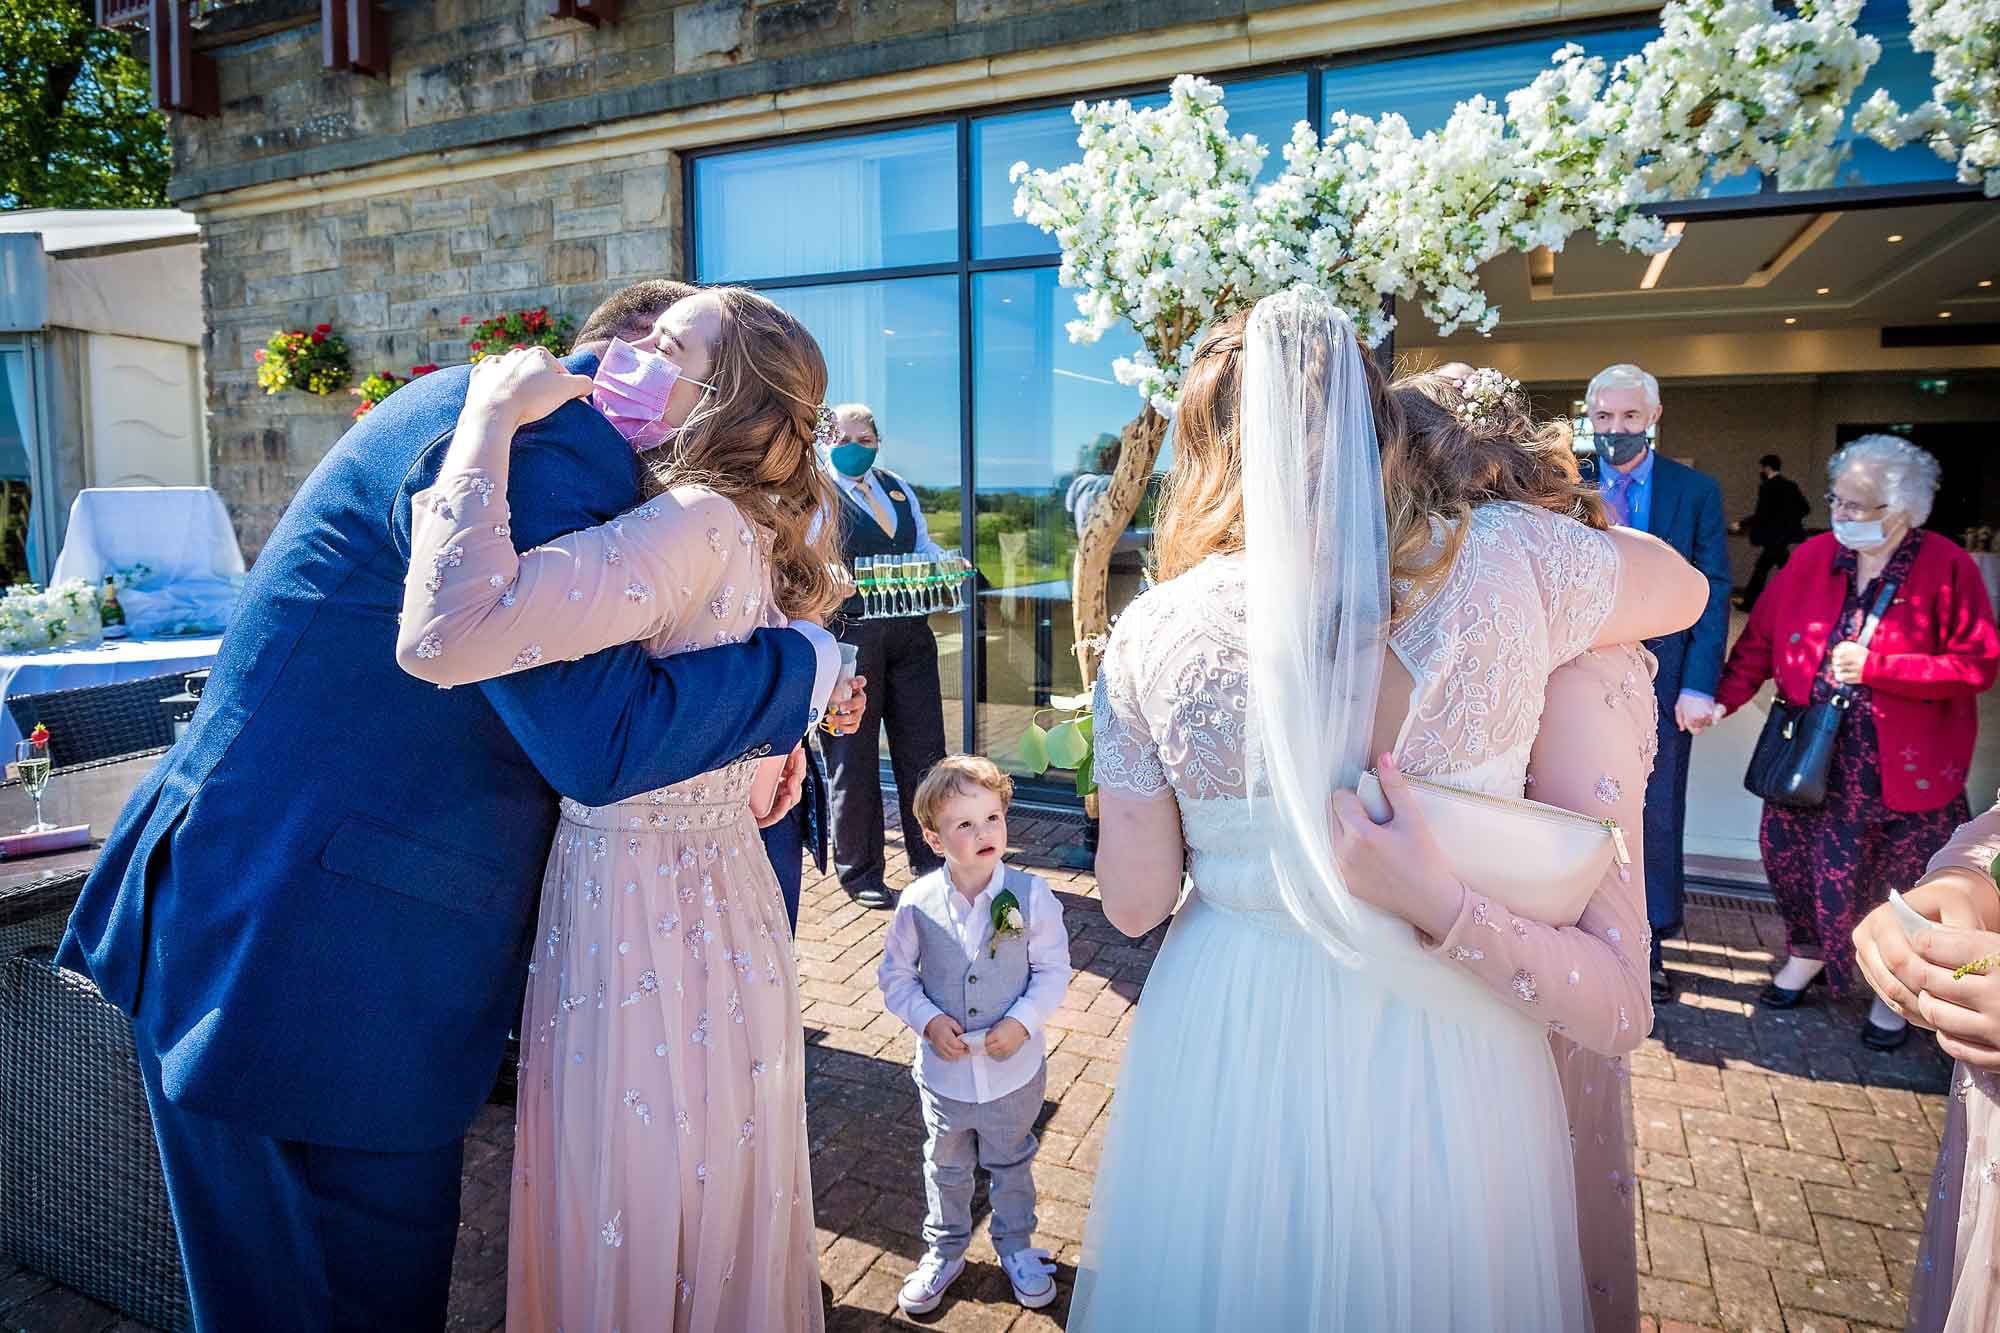 The newlyweds hug guests after their wedding ceremoiny at Celtic Manor Resort